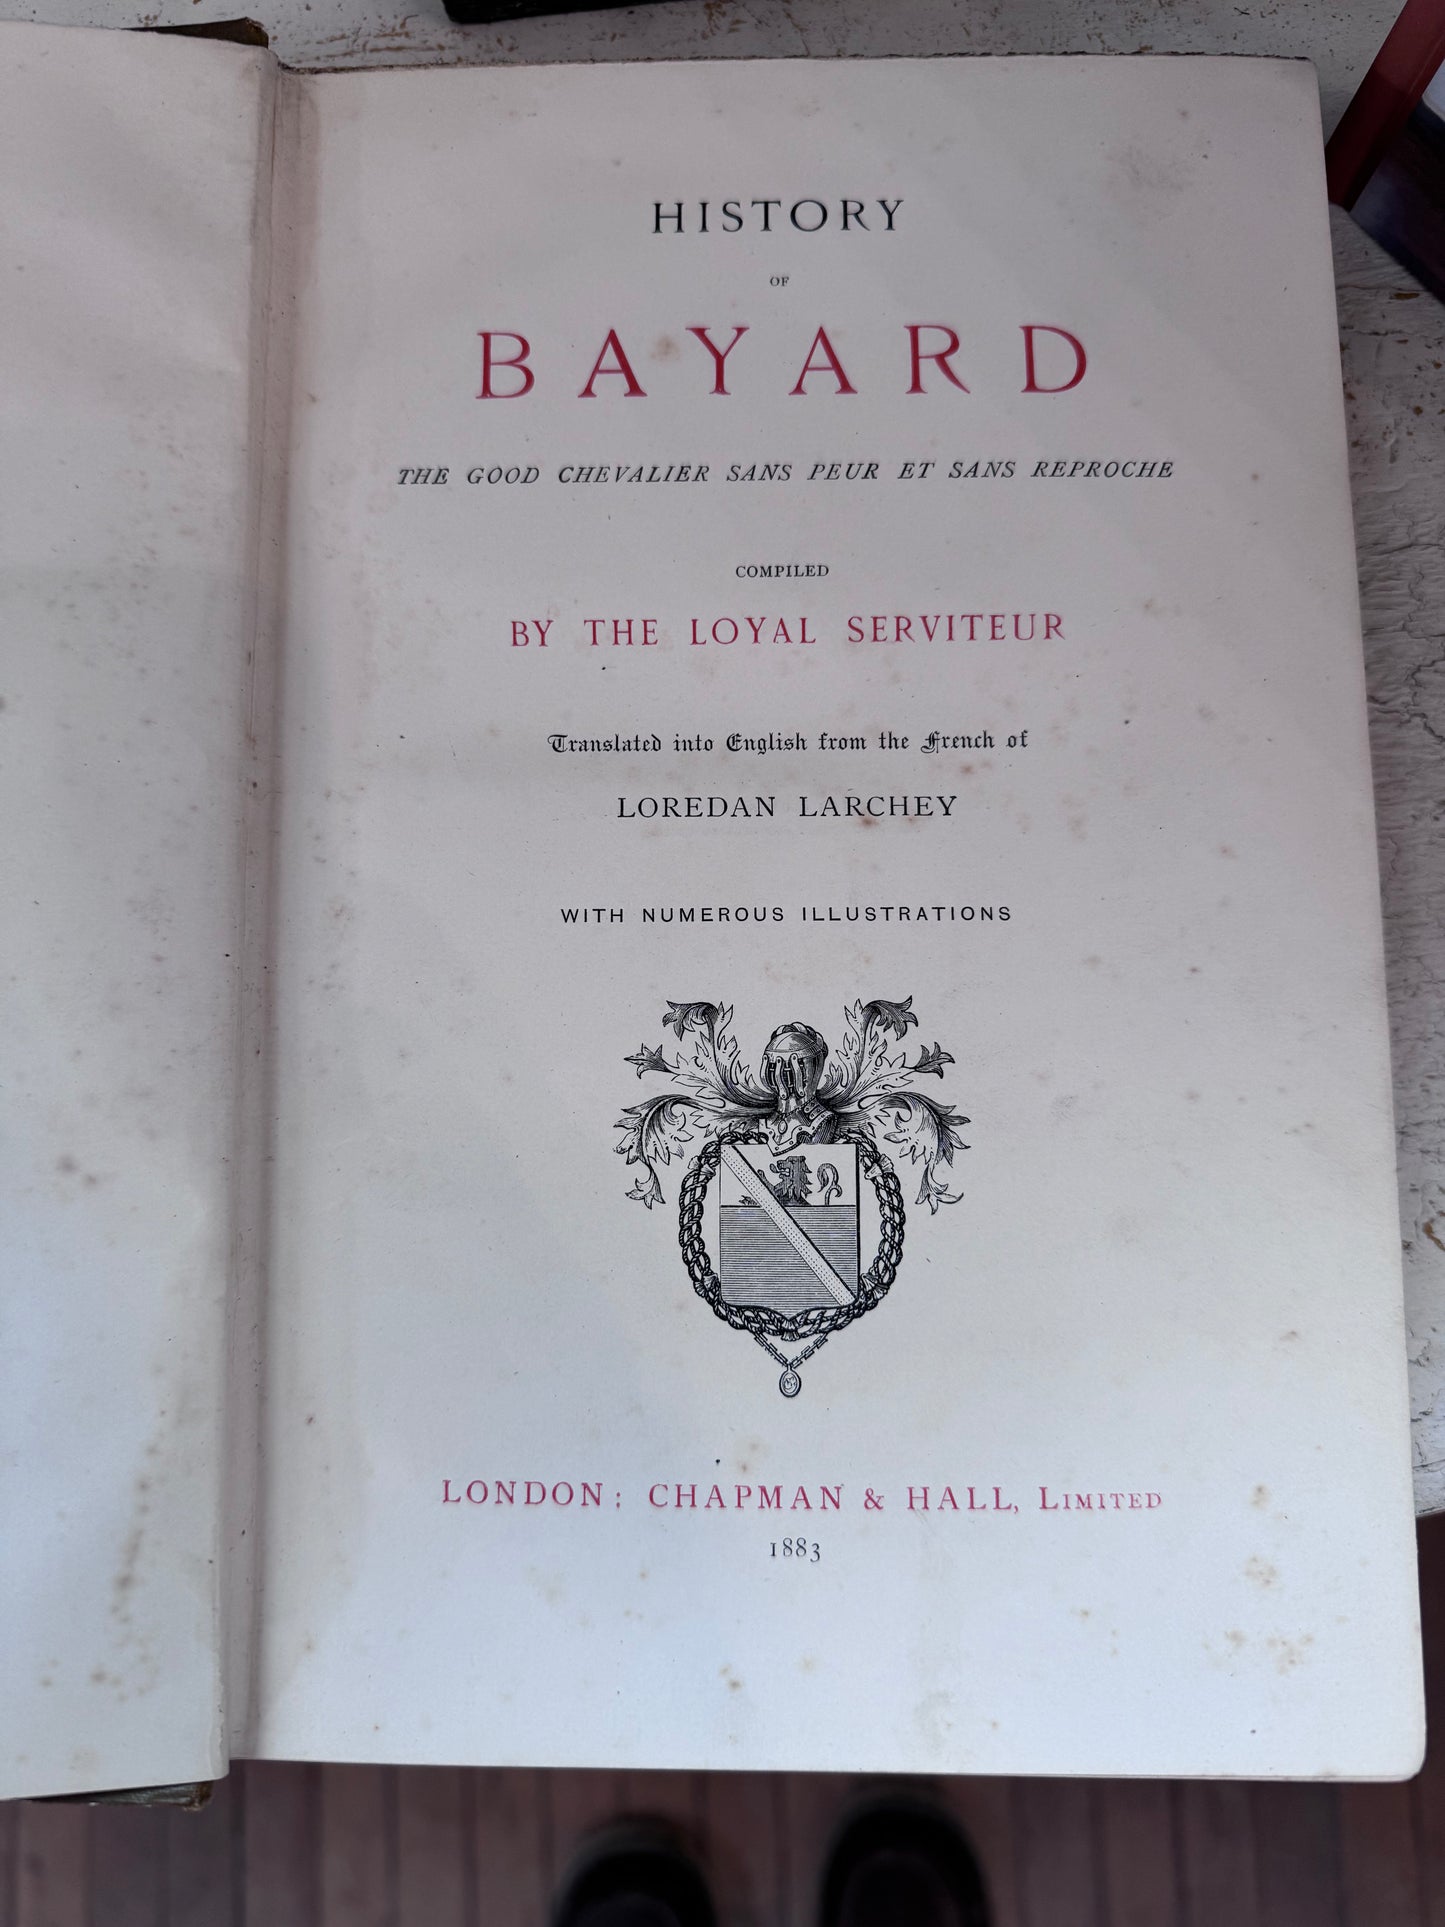 History of Bayard: (Pierre Terrail)The Knight without Fear and Beyond Reproach 1883 by Larchey, Loredan - 1883